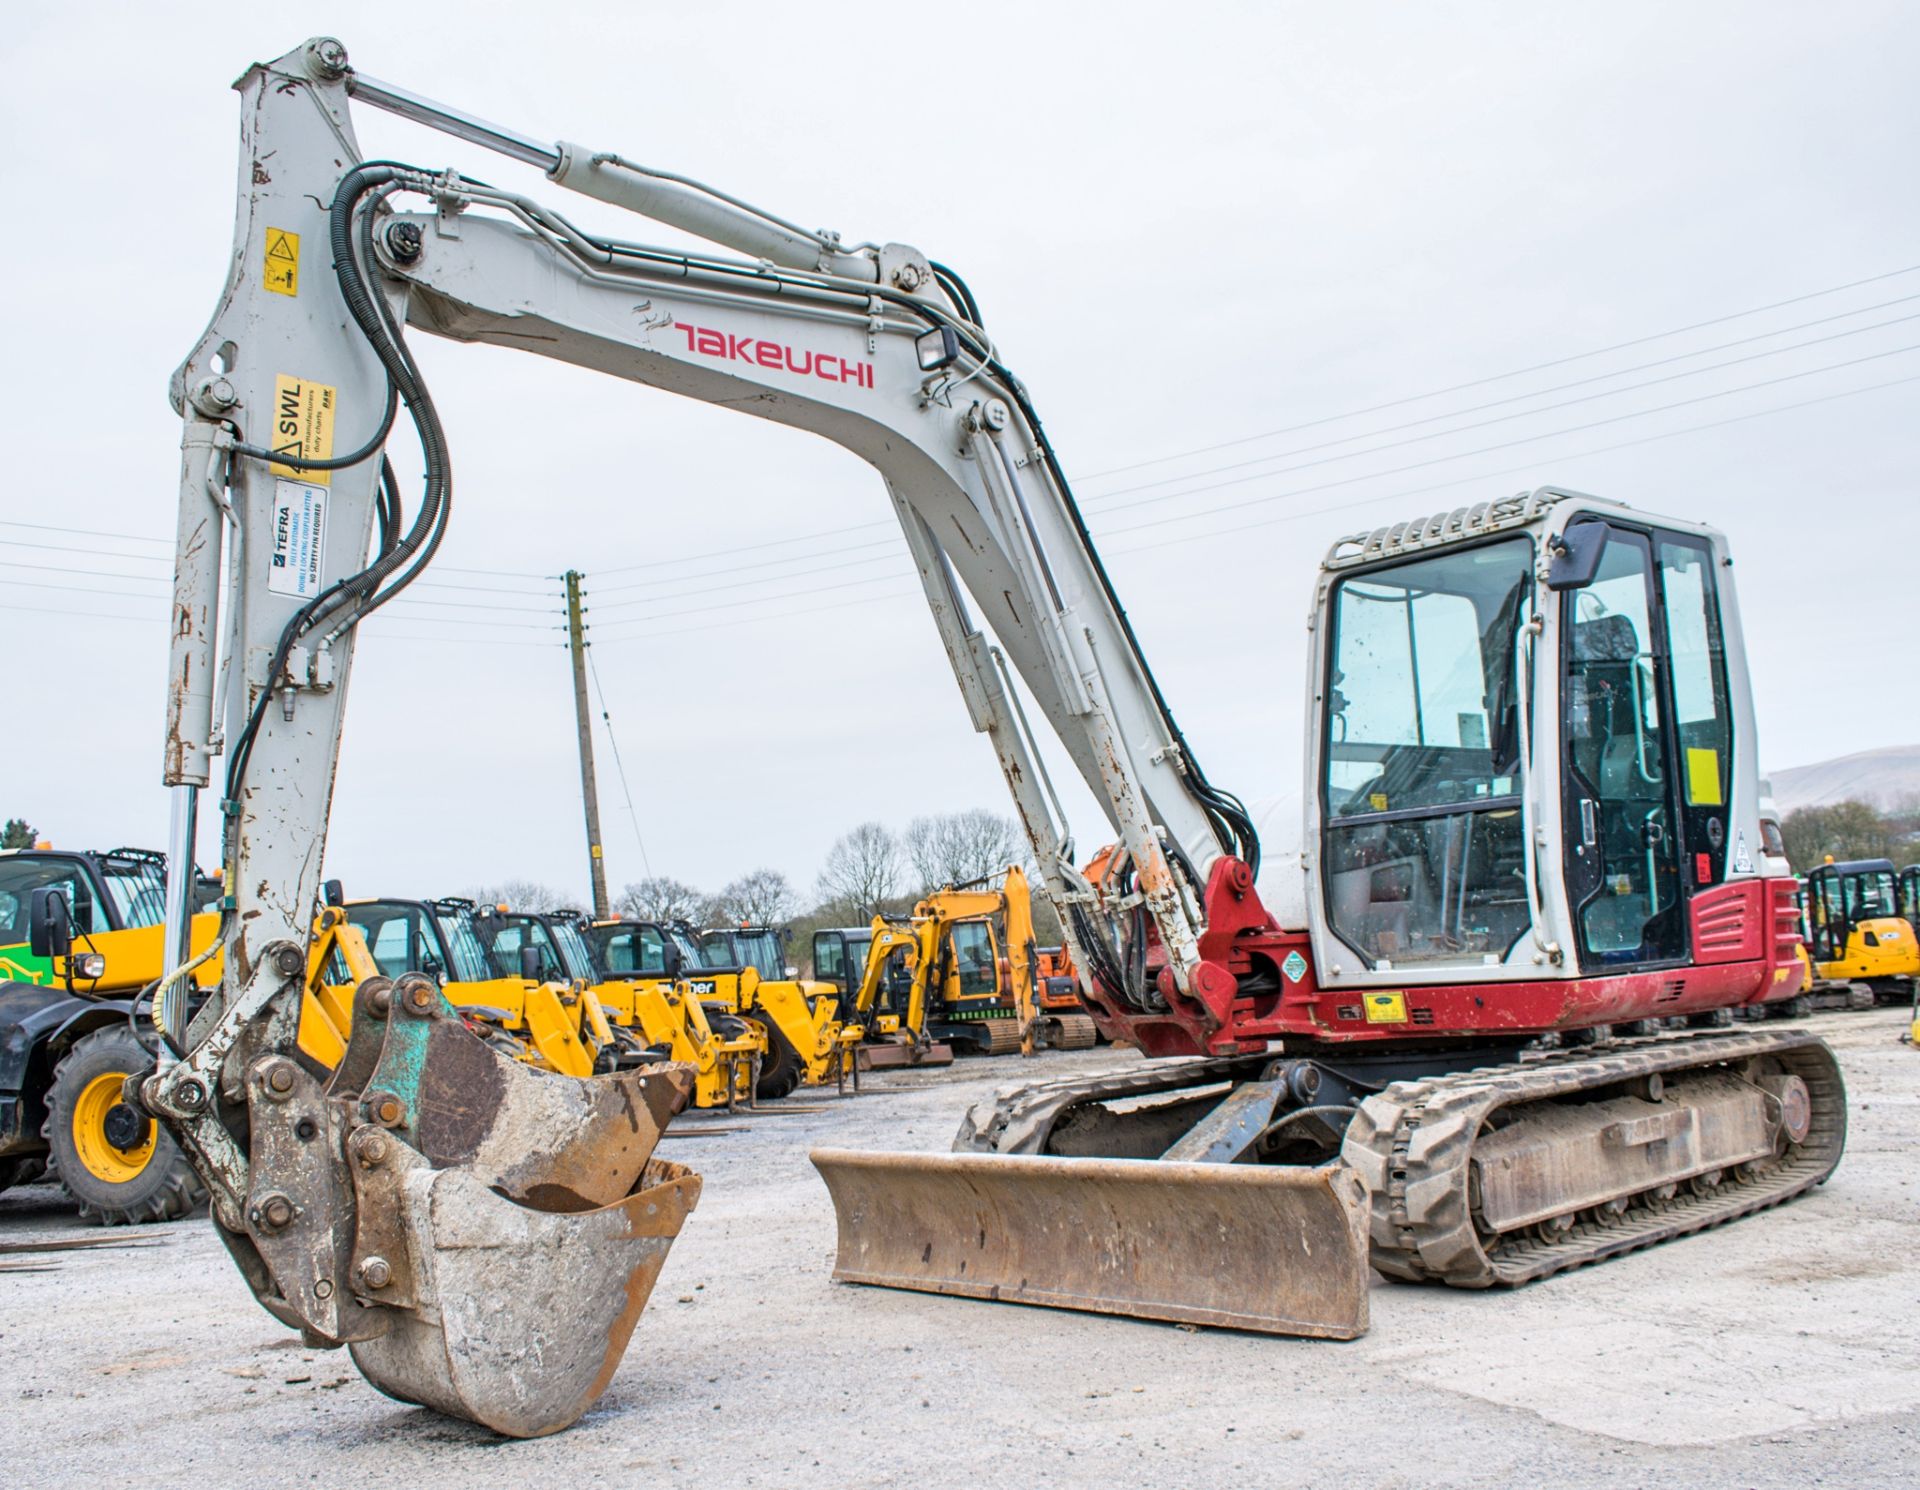 Takeuchi TB285 8.5 tonne rubber tracked excavator Year: 2012 S/N: 185000171 Recorded Hours: 6005